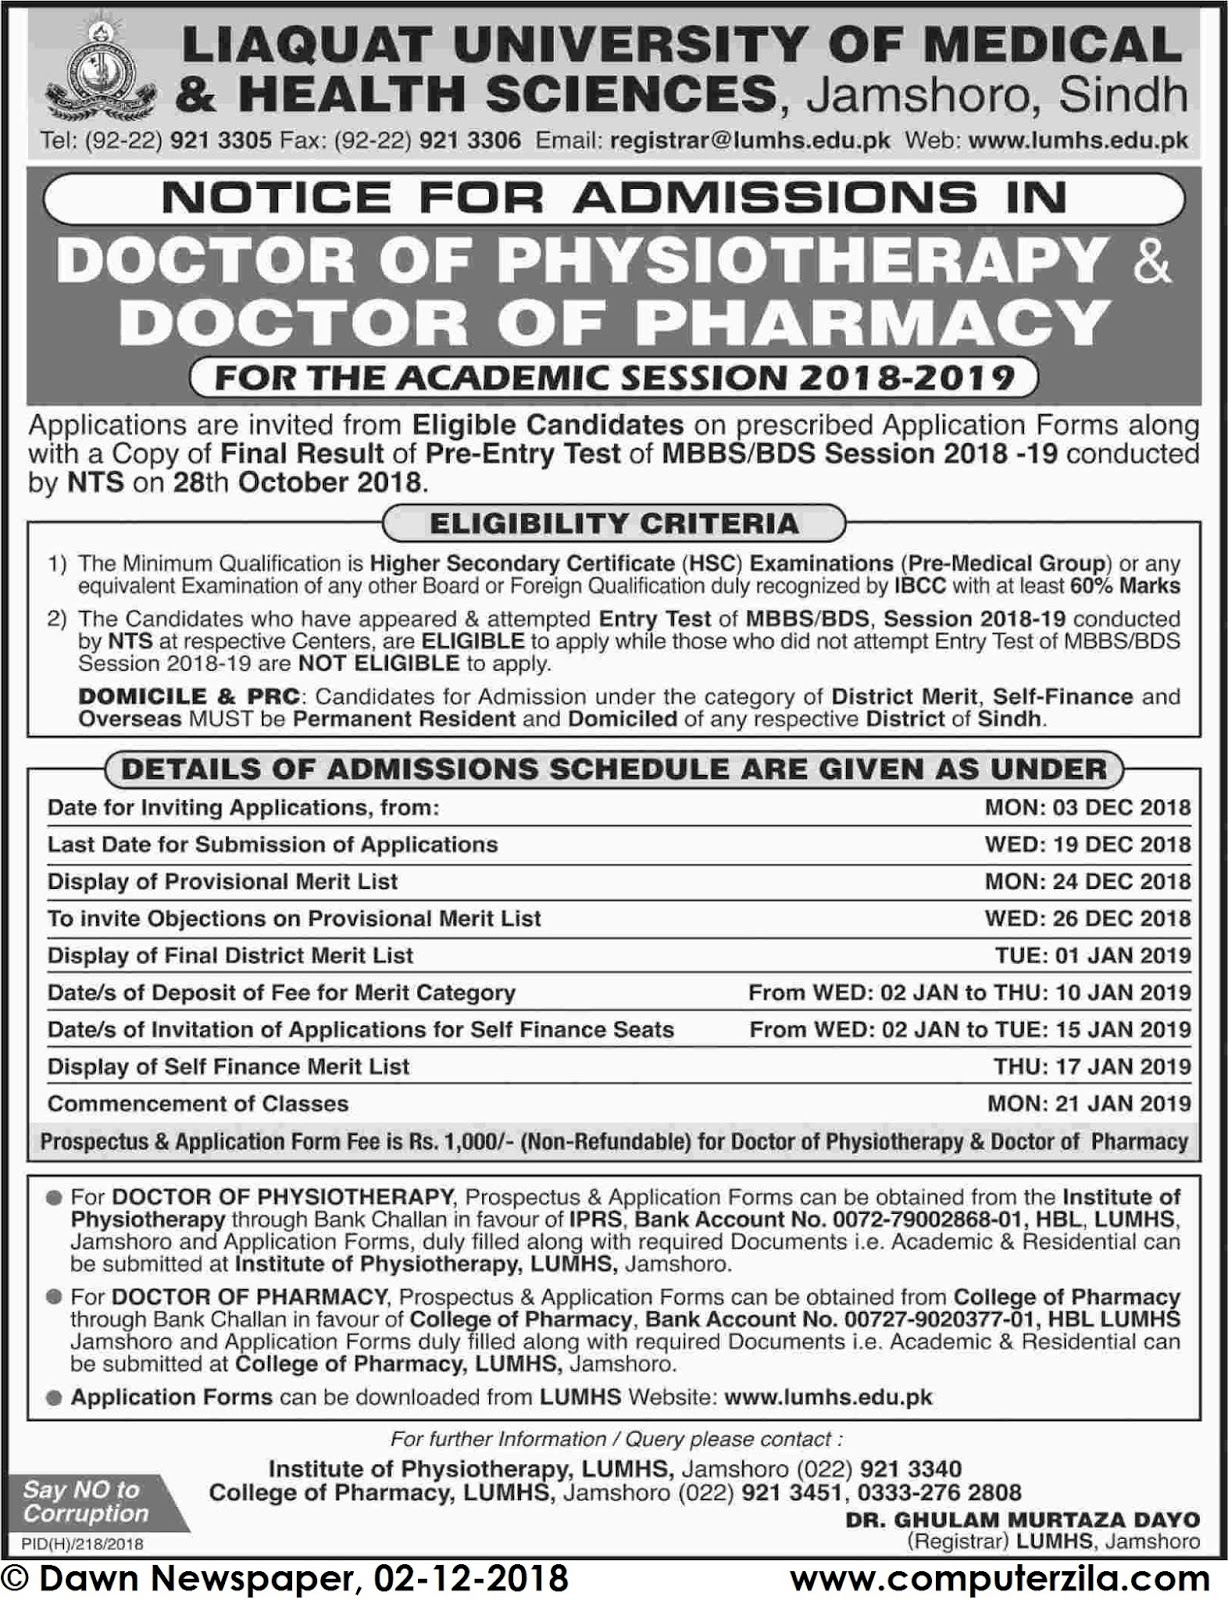 Admissions Open For Spring 2019 At LUMHS Jamshoro Campus